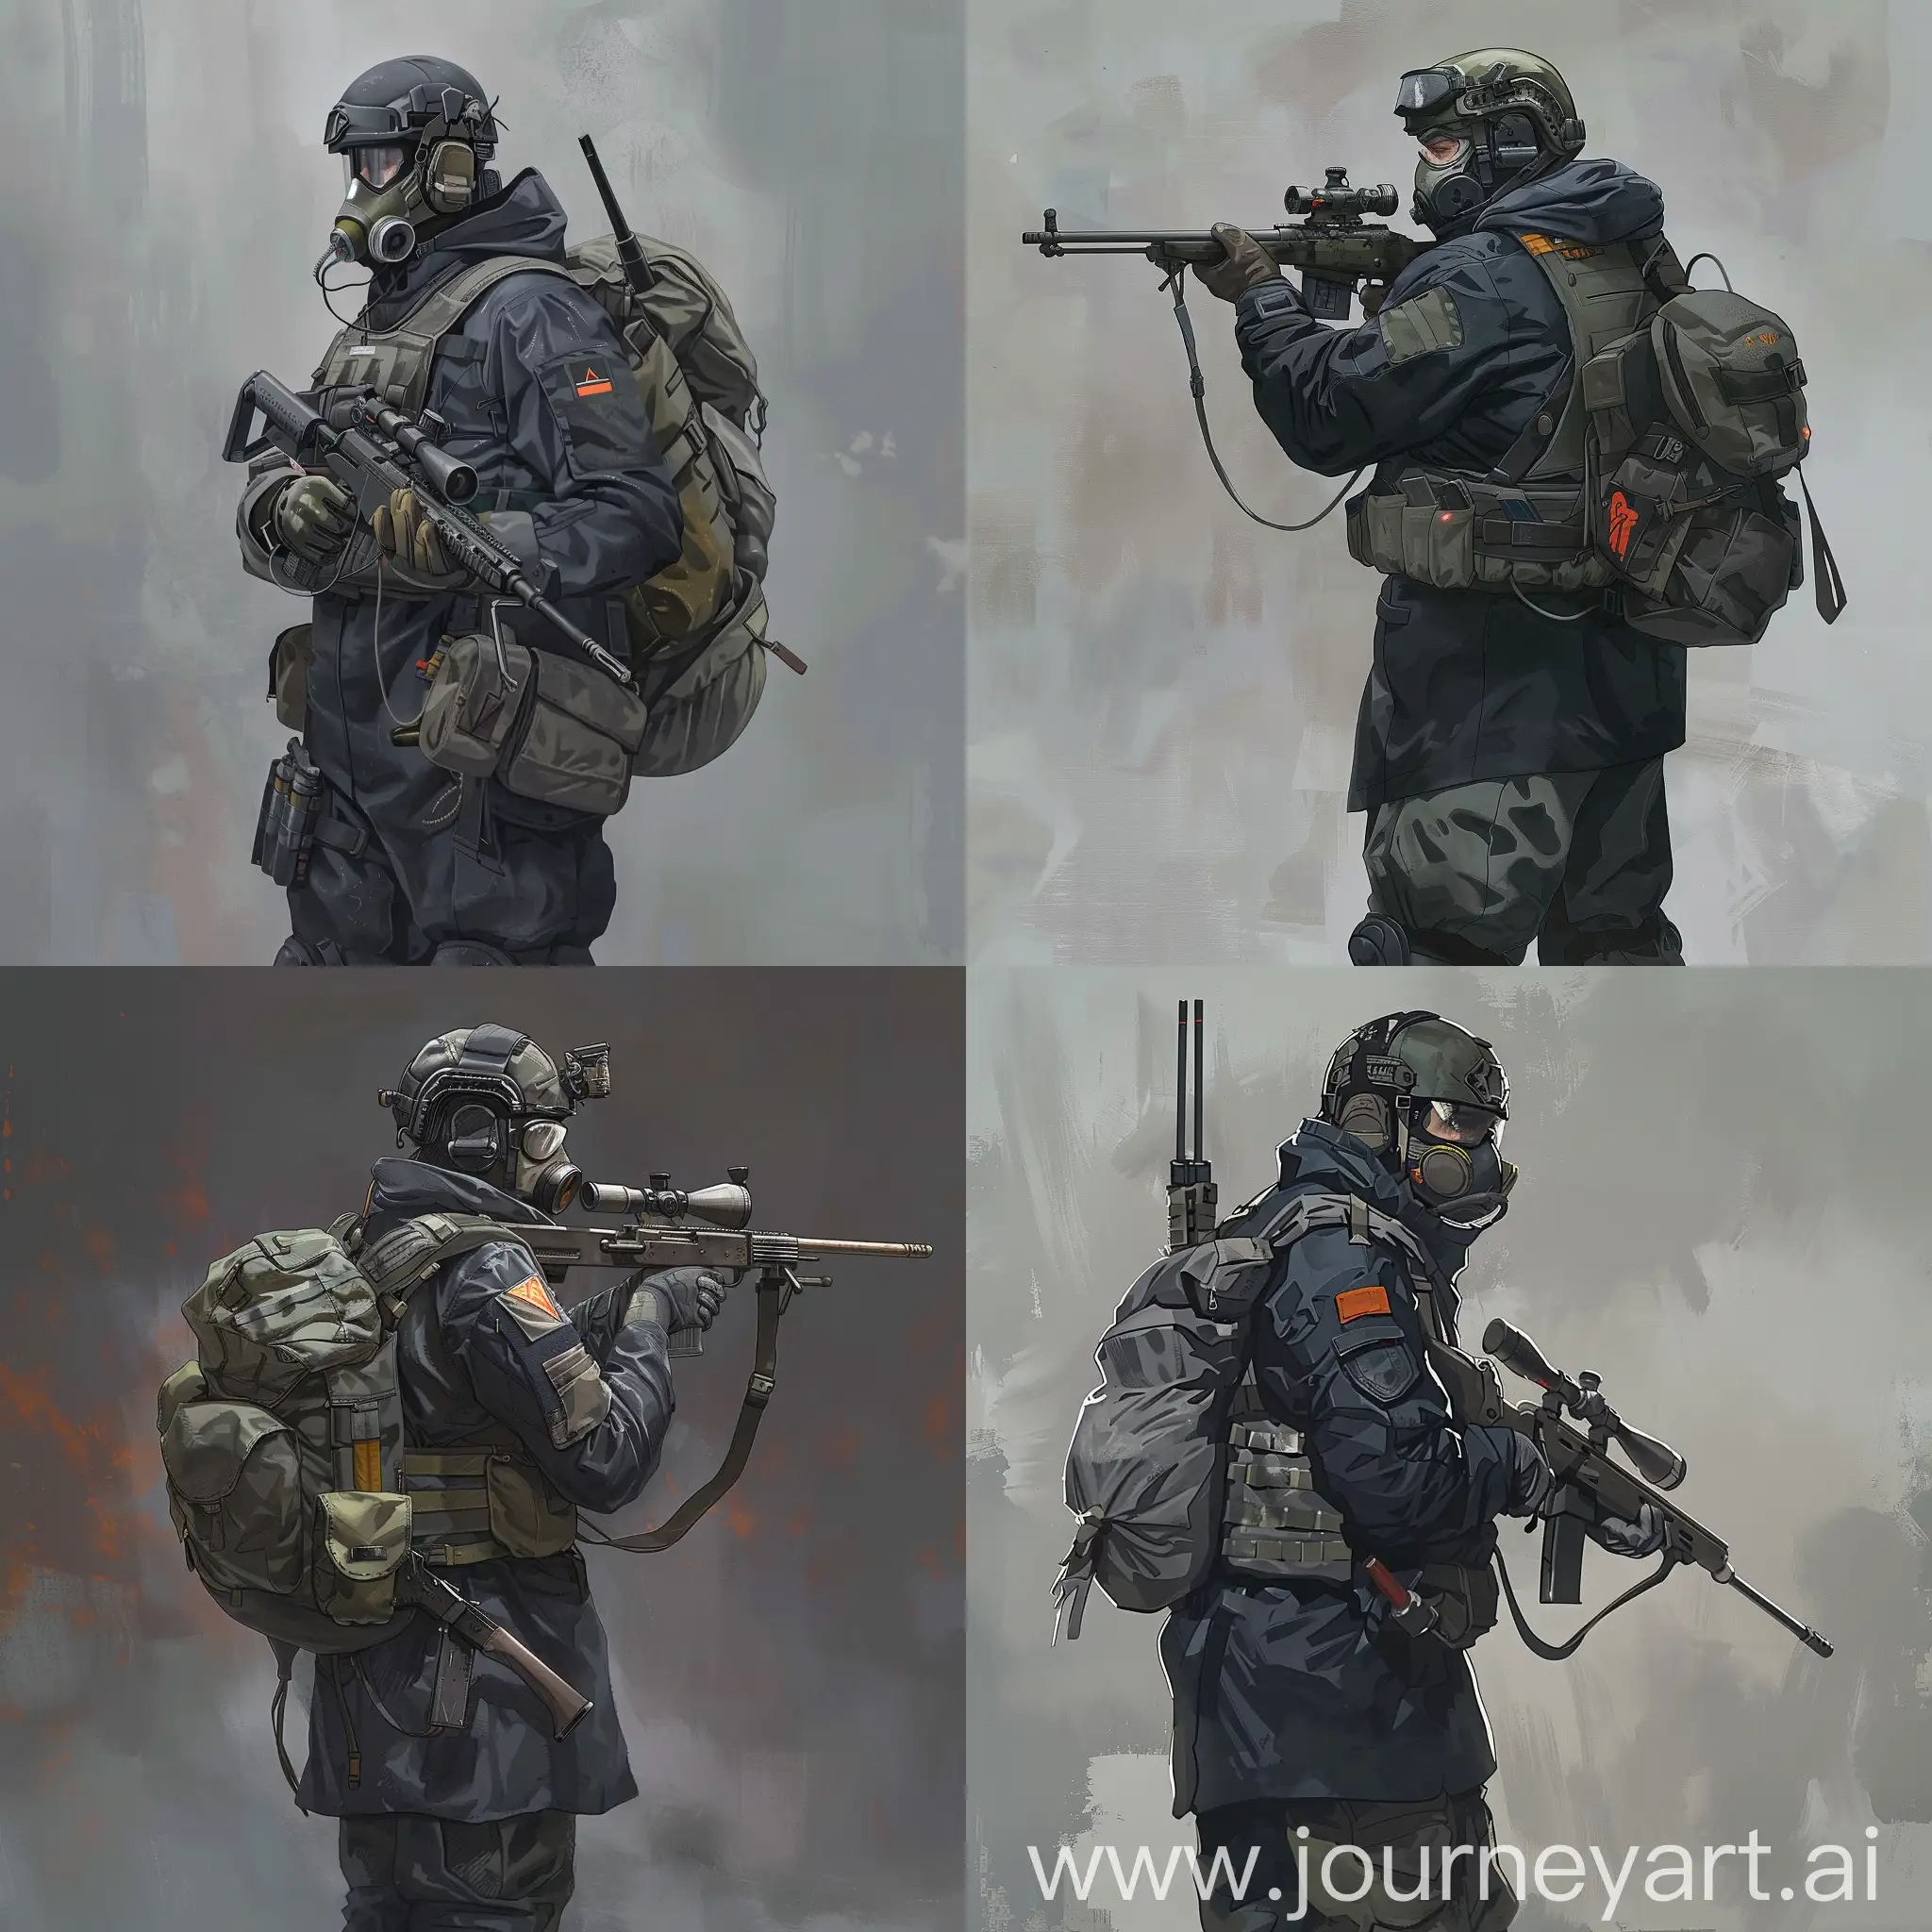 Mercenary-from-STALKER-Universe-in-Dark-Blue-Military-Raincoat-with-Sniper-Rifle